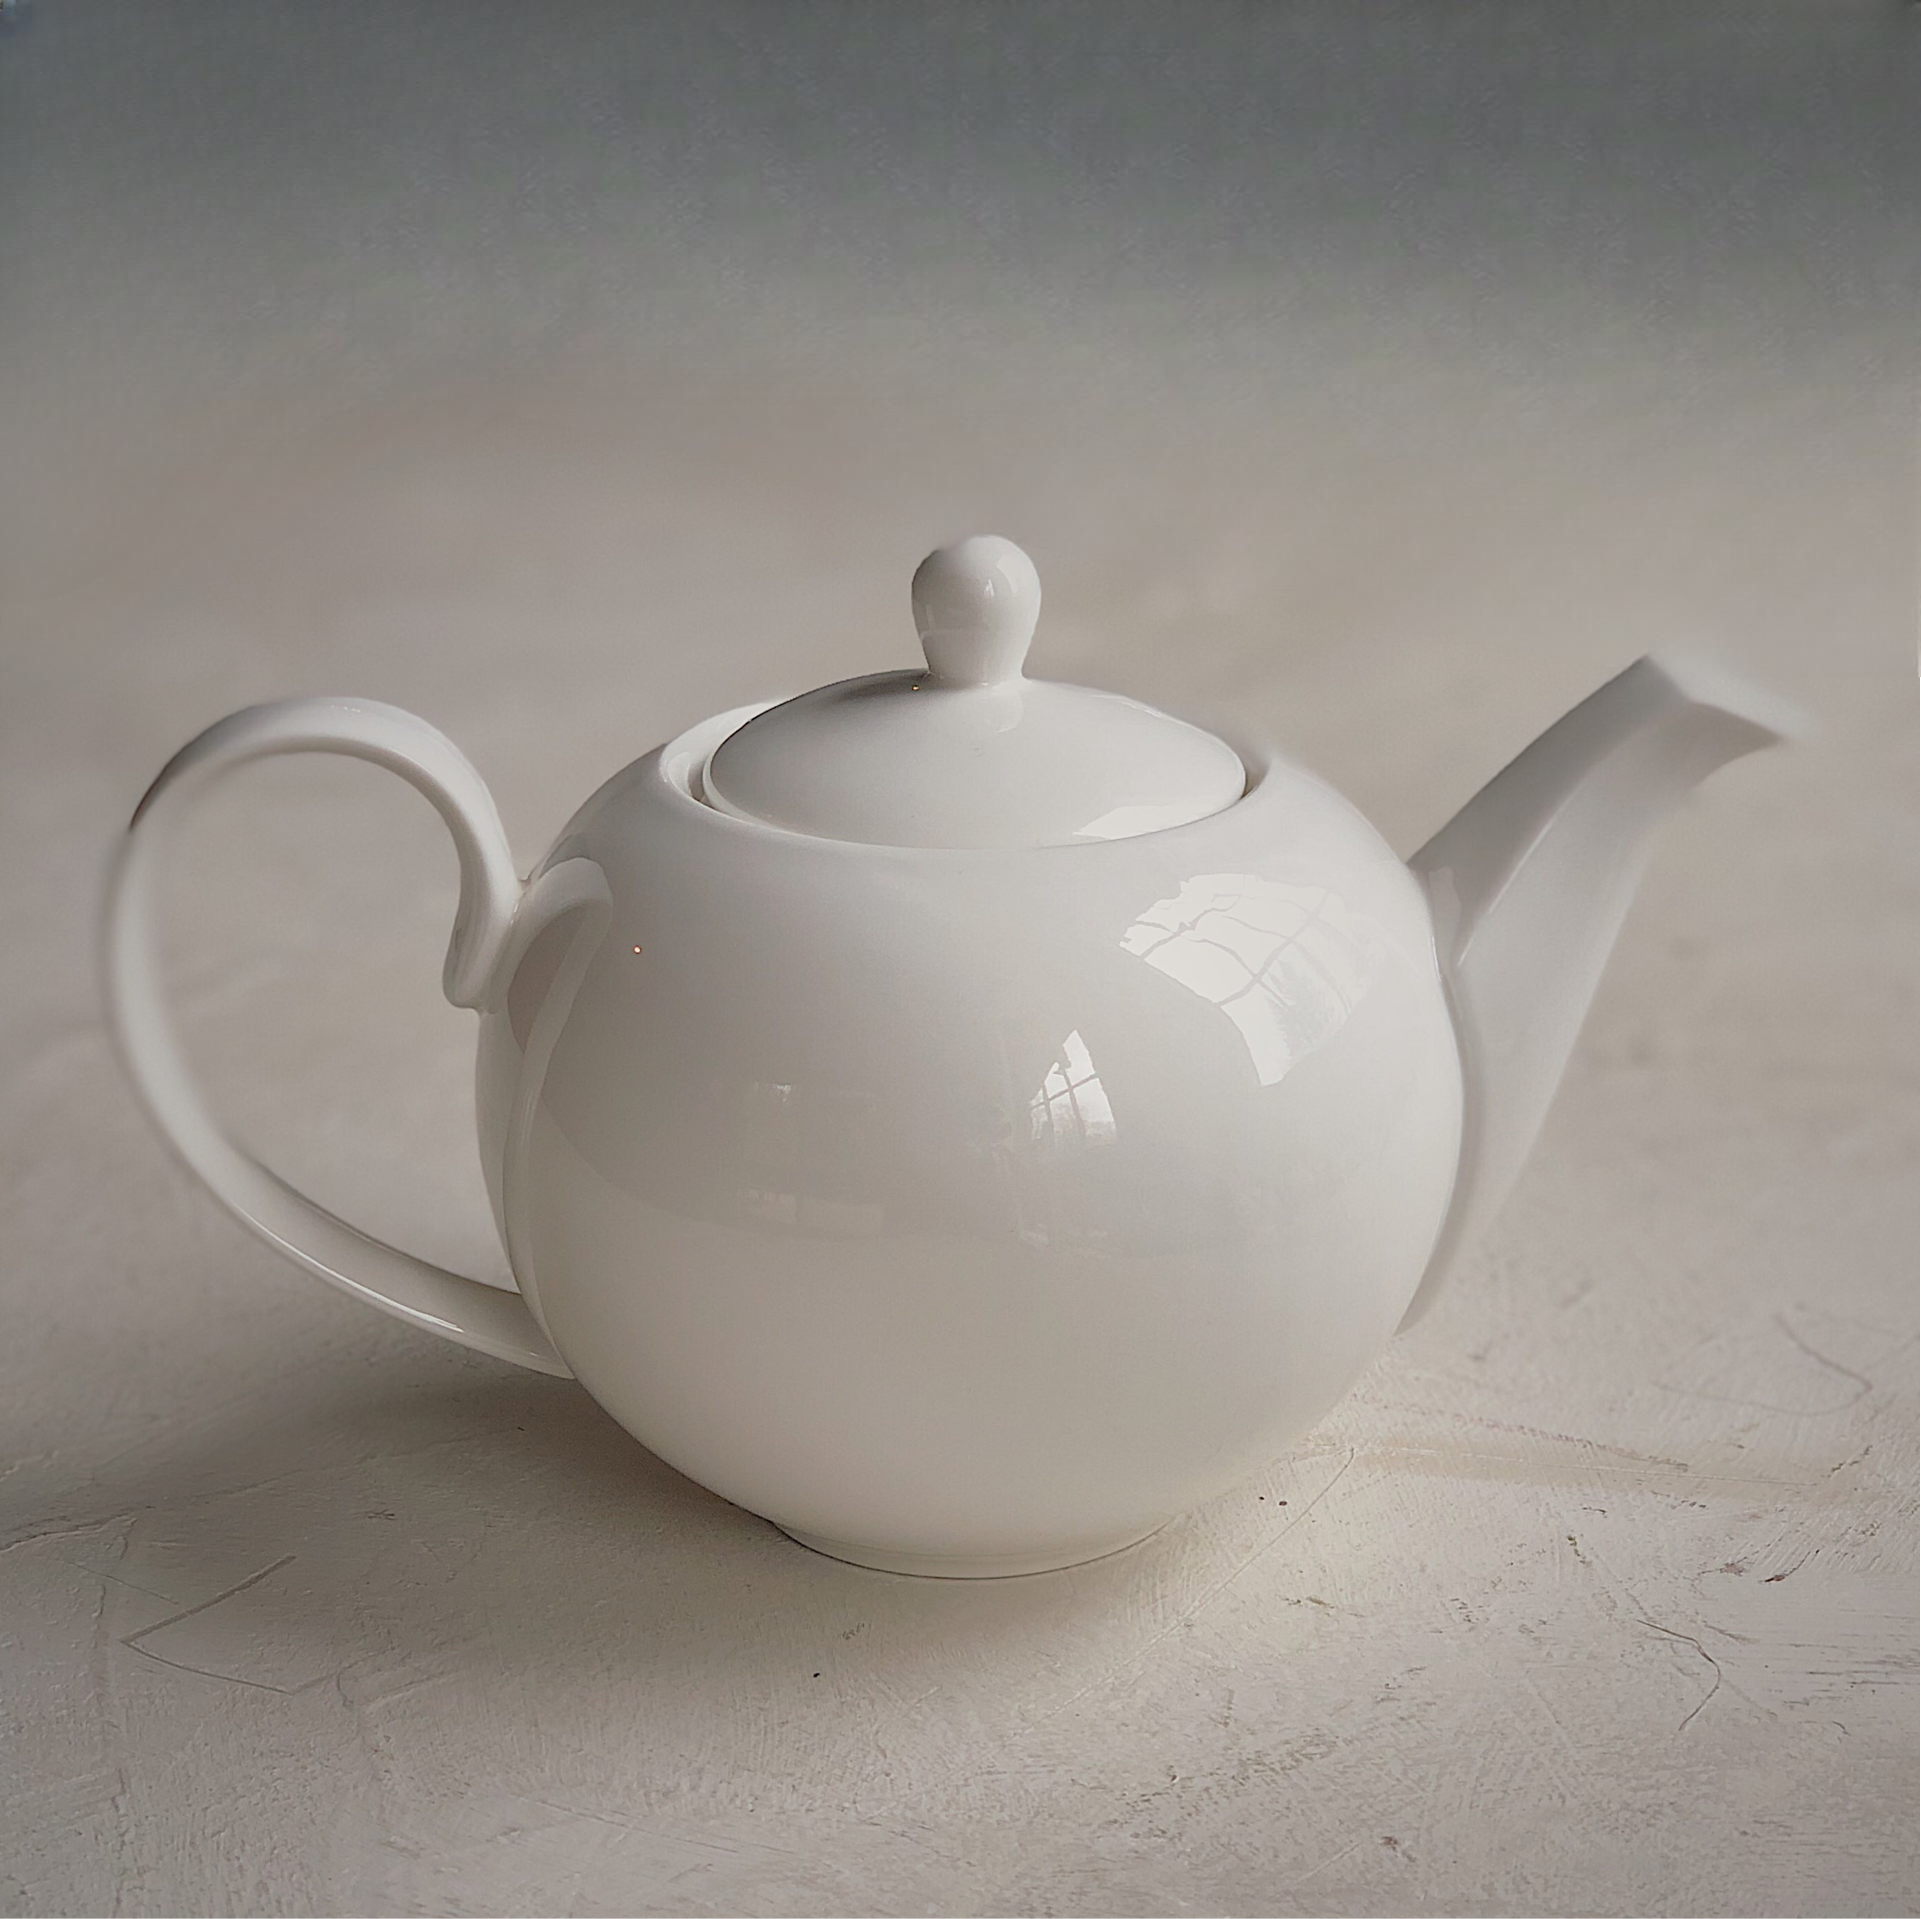 Home Accessories and kitchen  White Basics Teapot by Maxwell & Williams —  Sur mon x